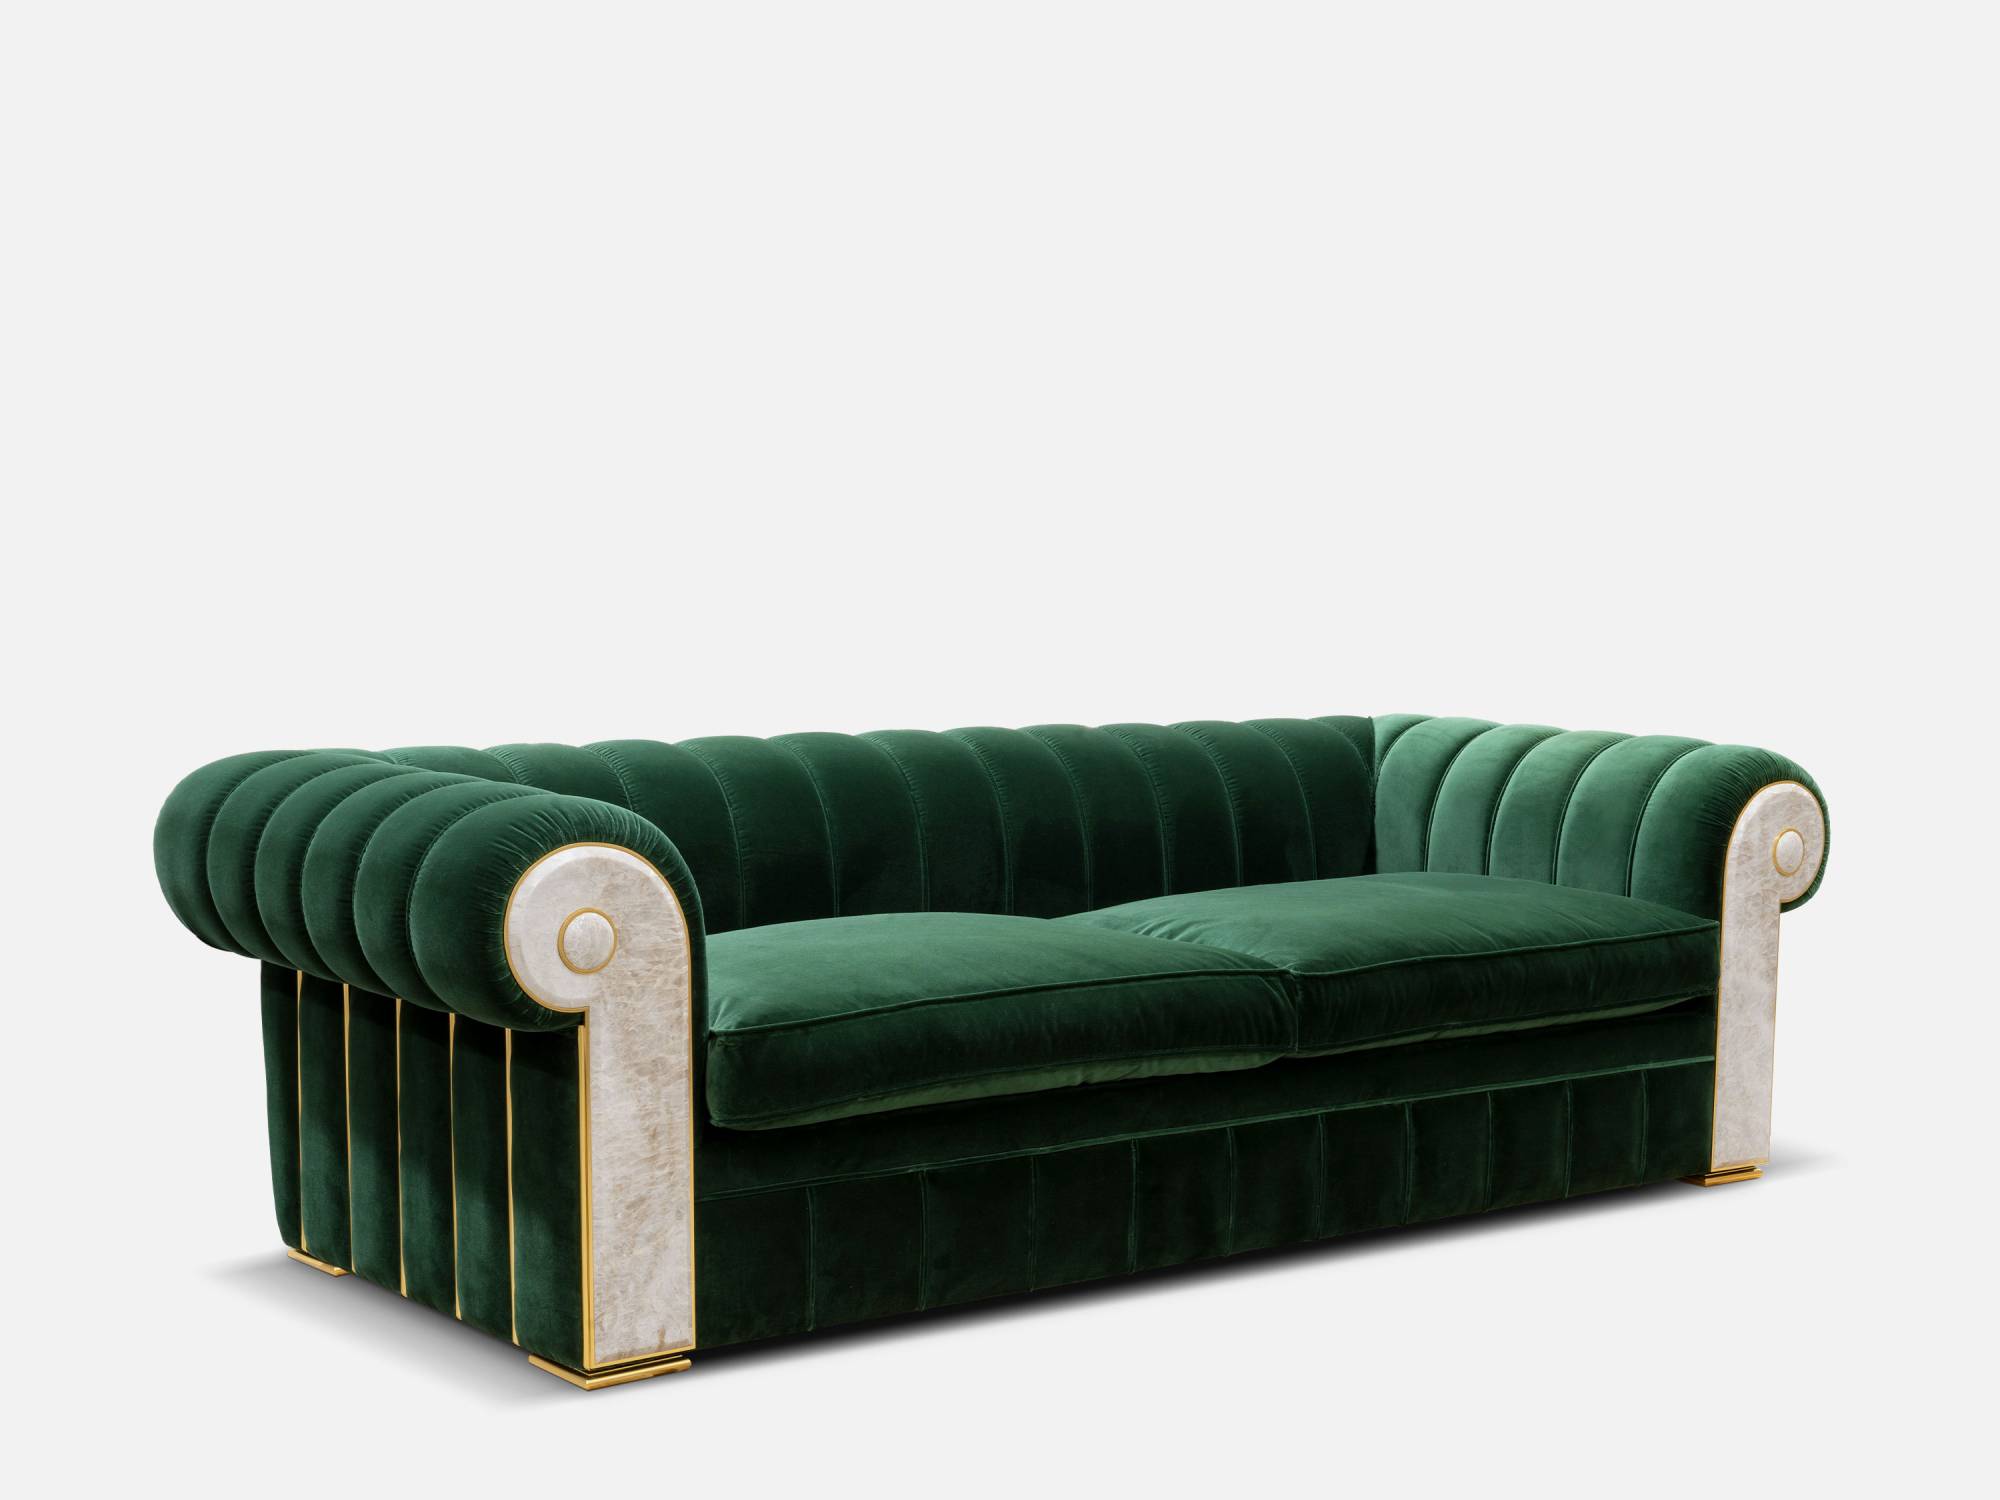 ART. 2221 – The elegance of luxury classic Sofas made in Italy by C.G. Capelletti.